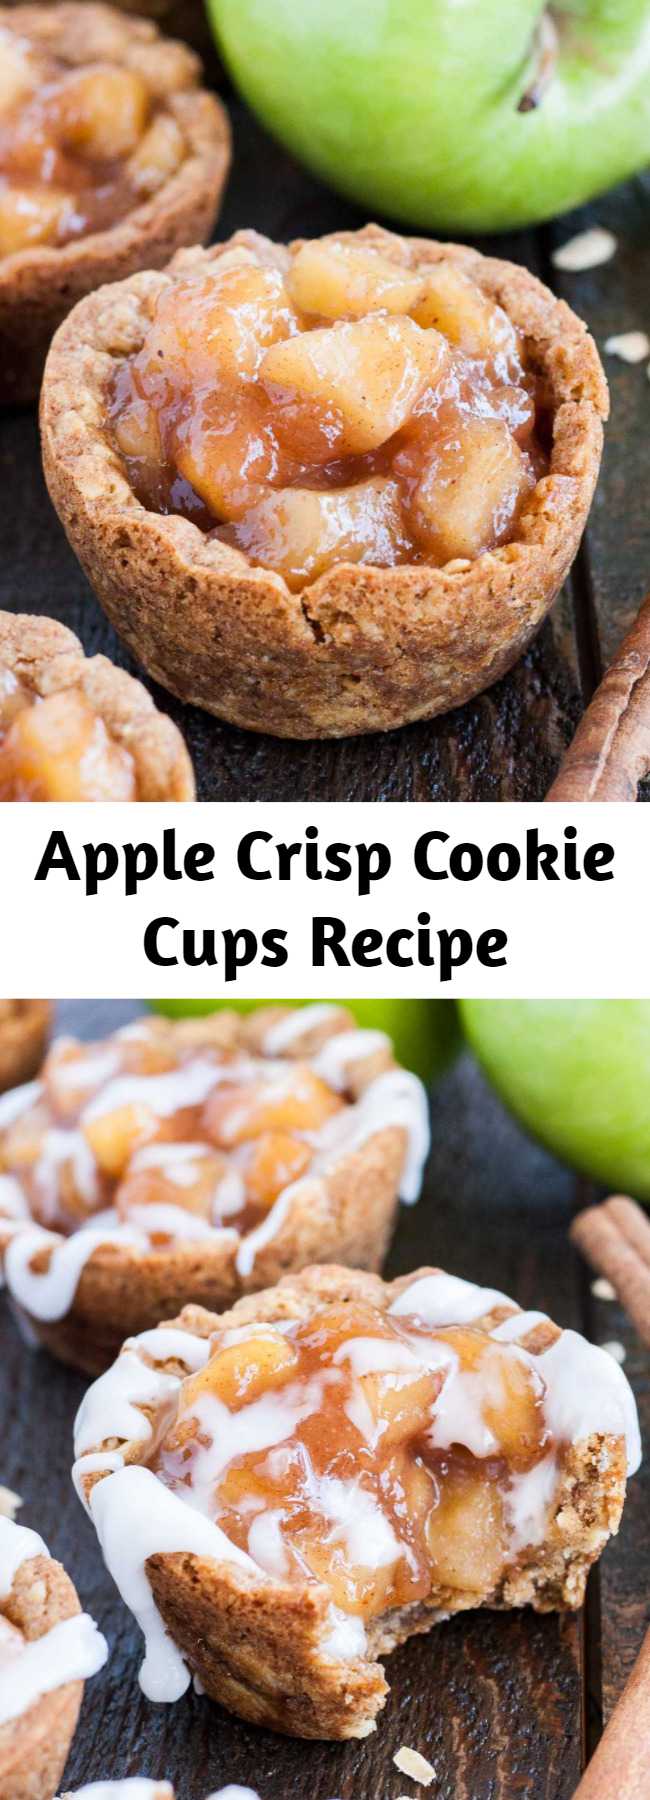 Apple Crisp Cookie Cups Recipe - These Apple Crisp Cookie Cups combine classic oatmeal cookies with homemade apple pie filling for the perfect comfort food.